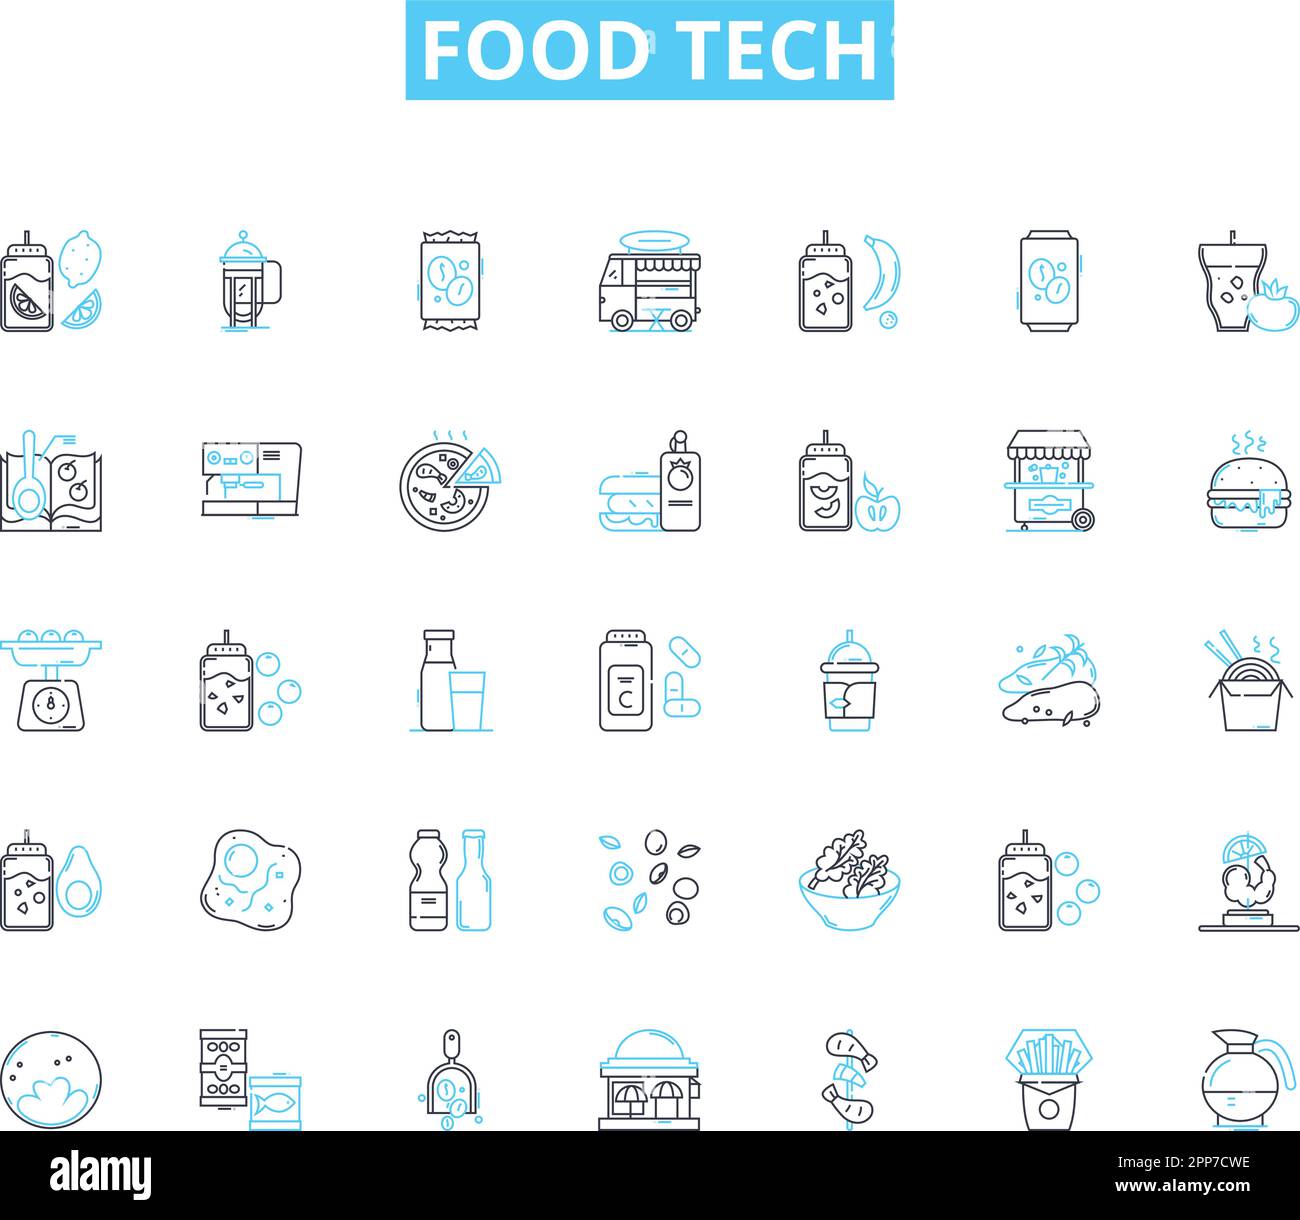 Food tech linear icons set. Automation, Biodegradable, Biosensors, Blockchain, Co-packaging, Cultured, Delivery line vector and concept signs Stock Vector